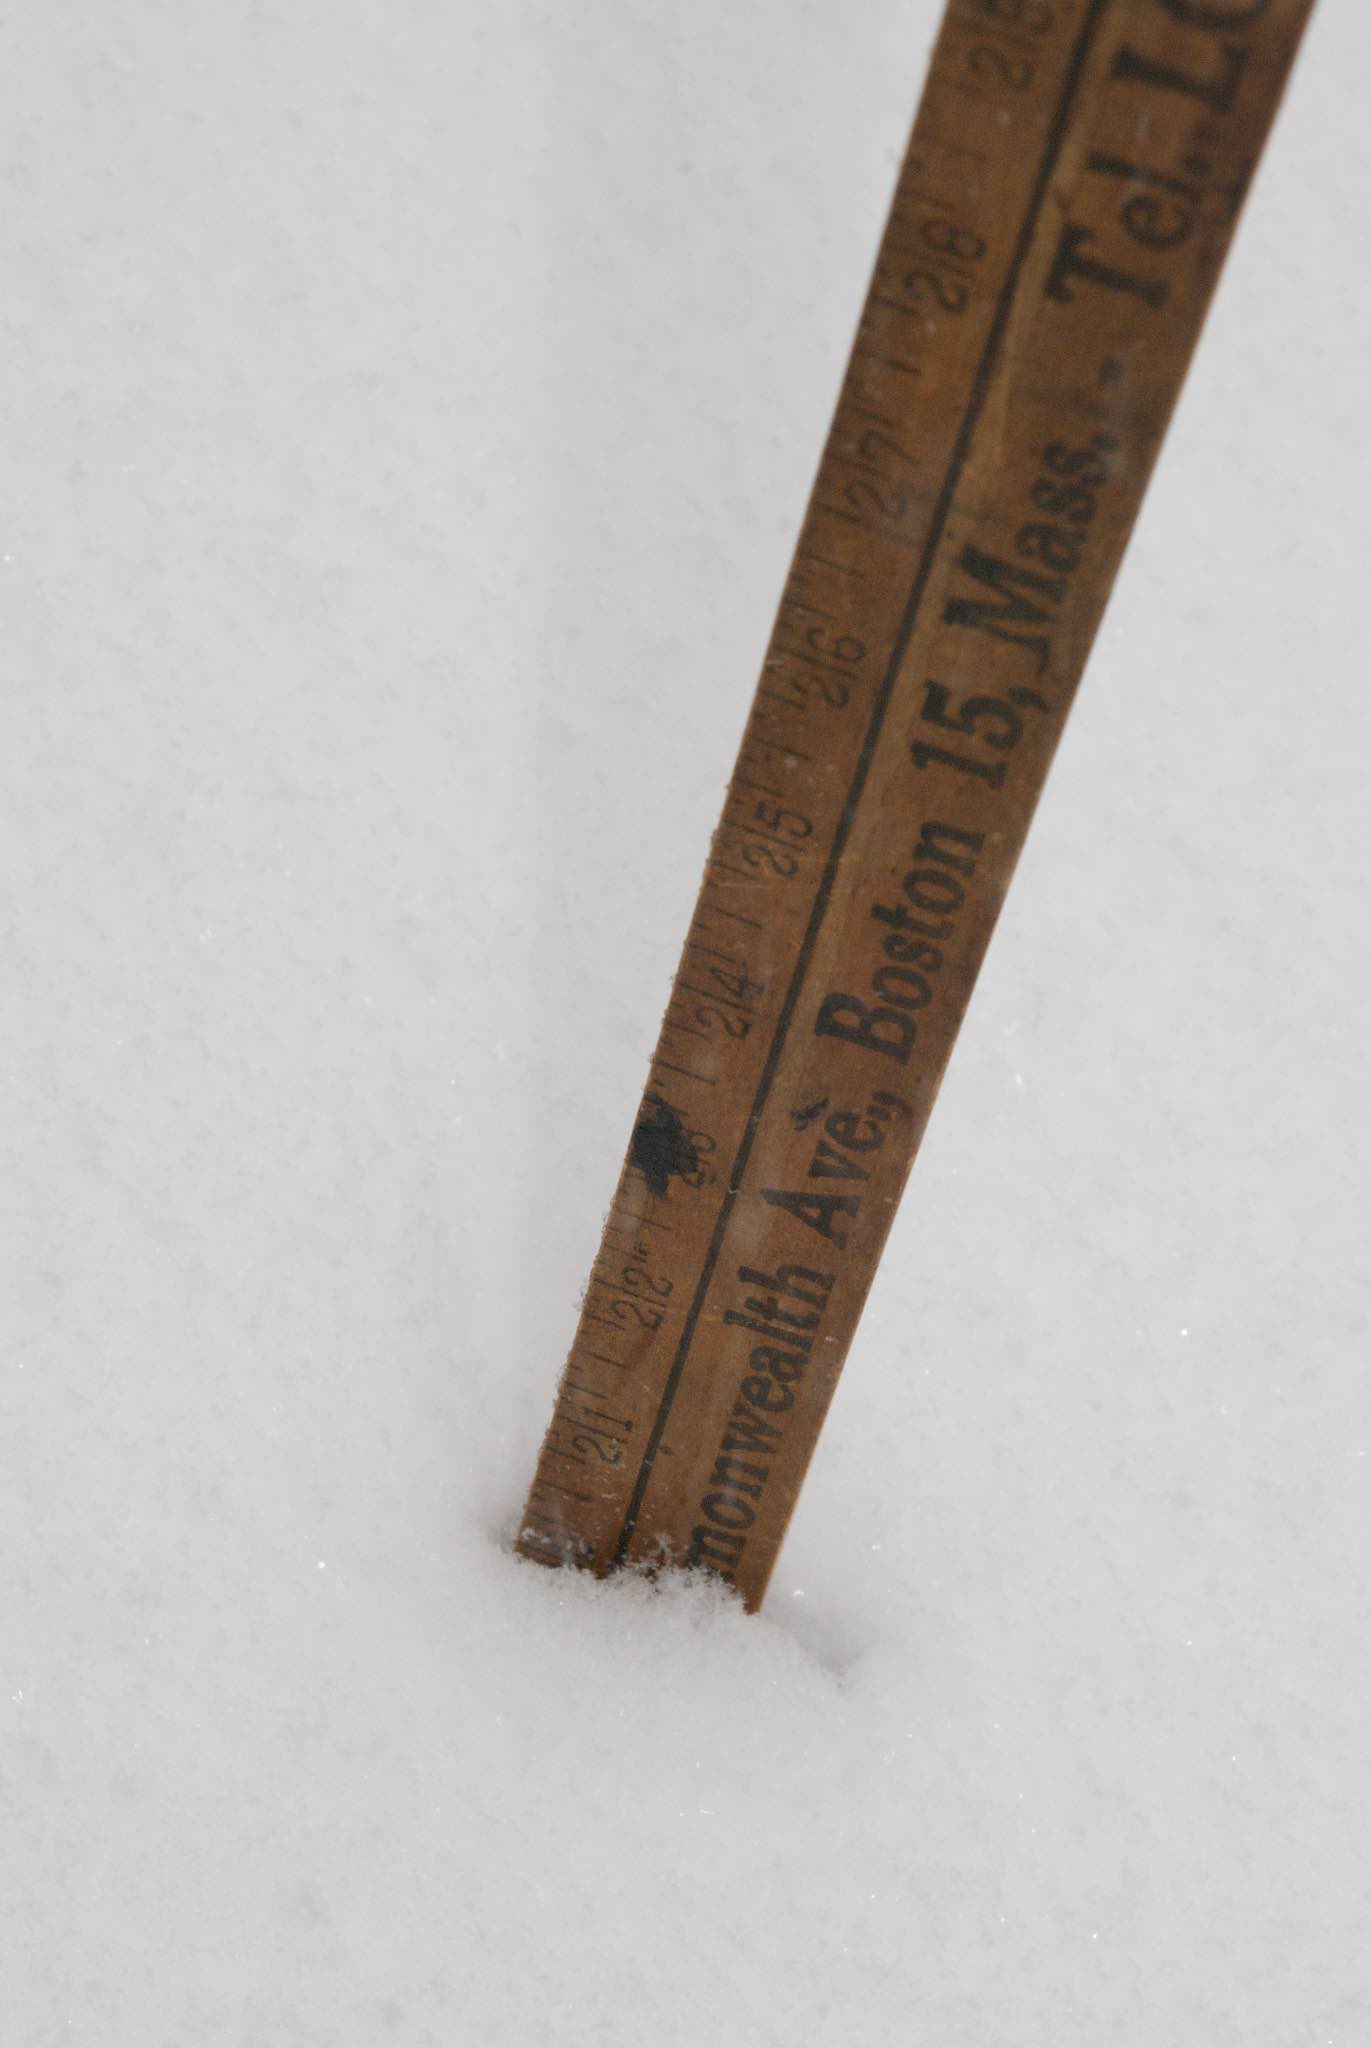 Ruler showing snow depth of 21 inches